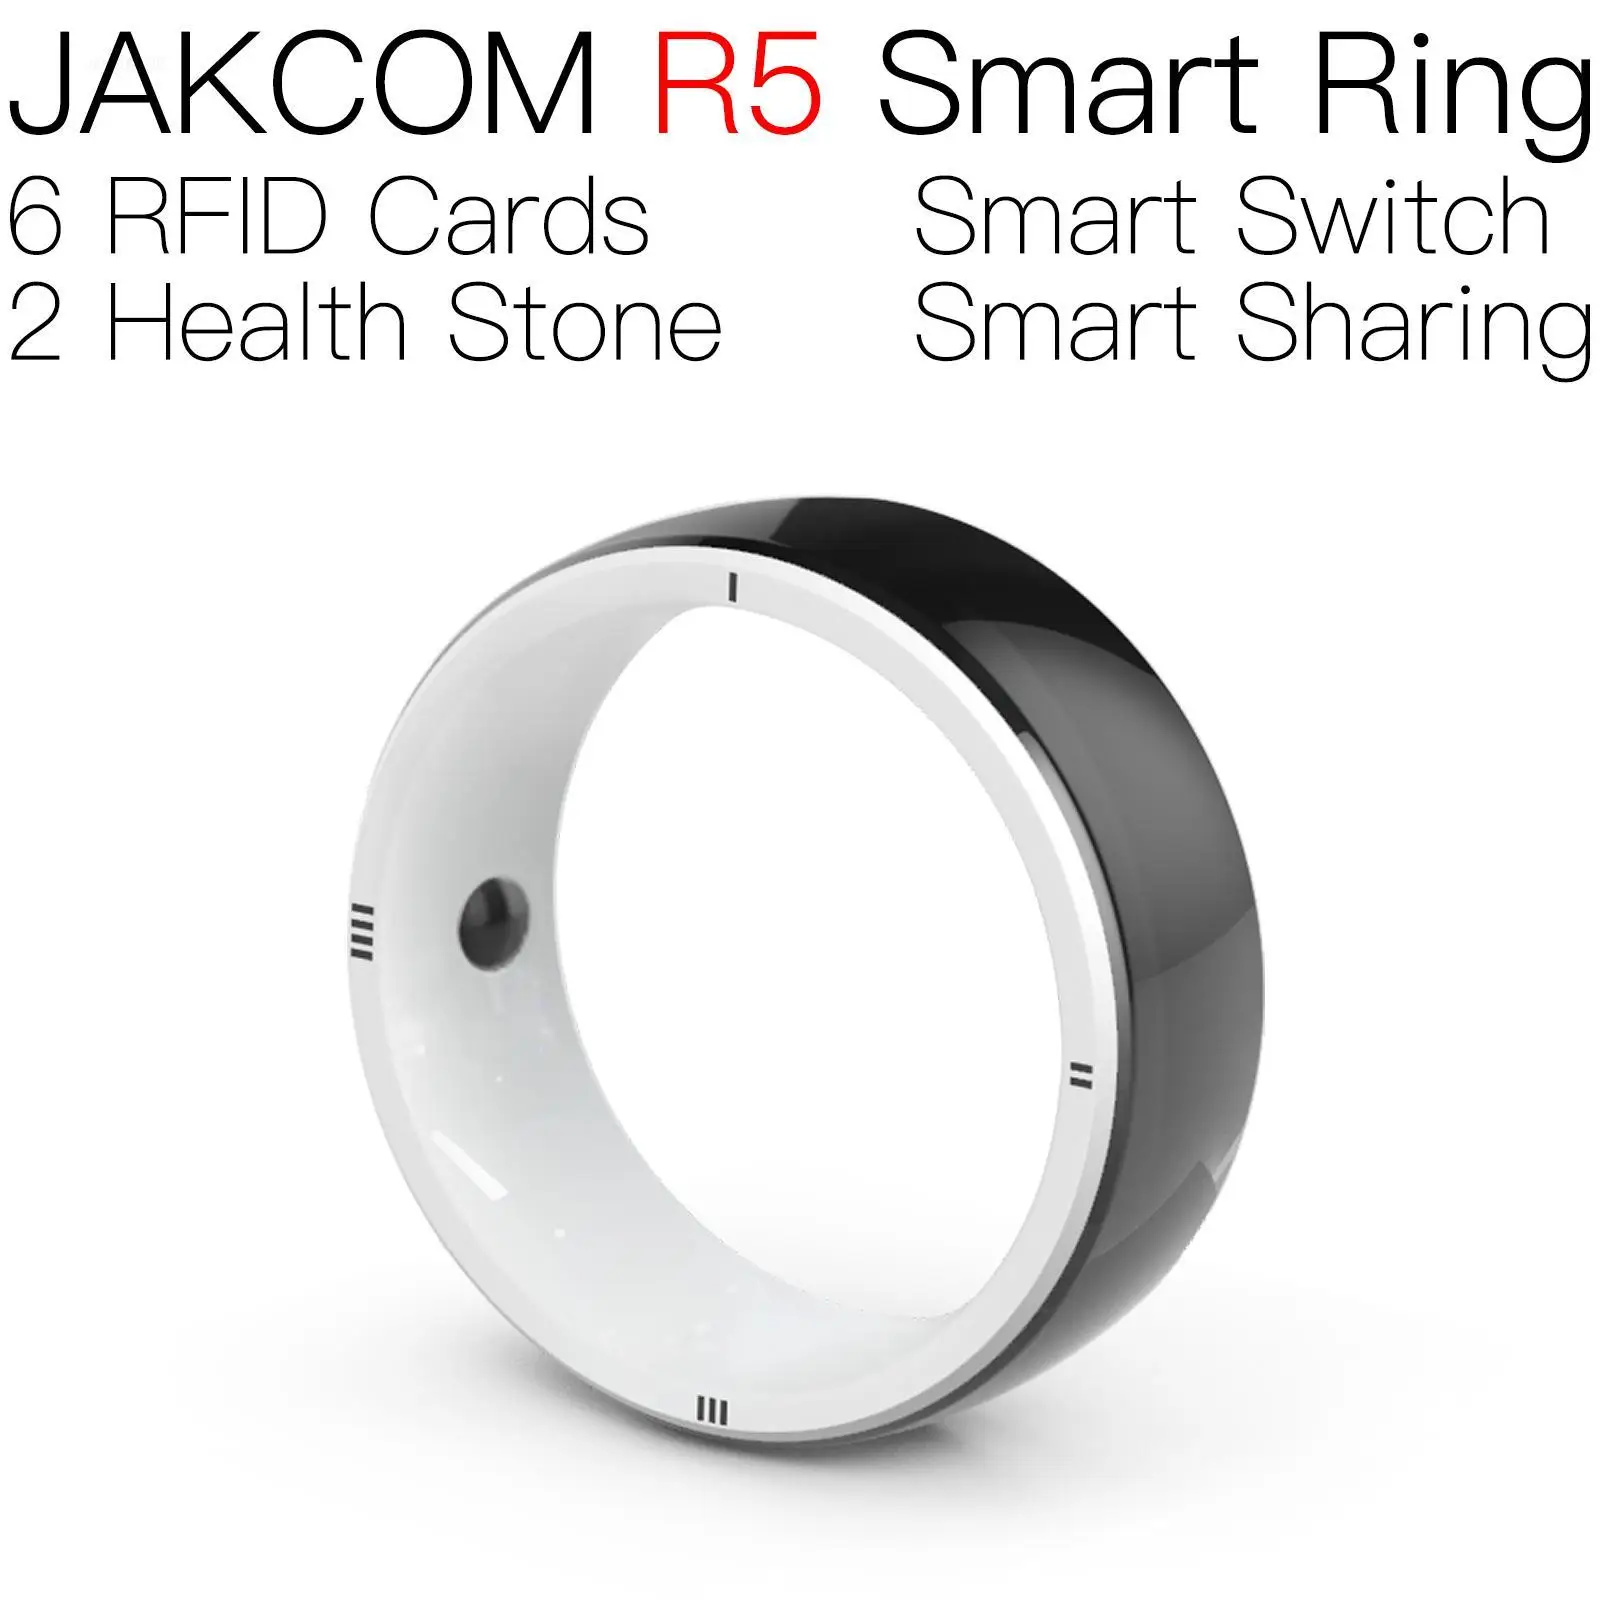 

JAKCOM R5 Smart Ring Nice than rfid 125khz sticker tag 213 reader outdoor wiegand 26 rs232 iso14443a microchip remover